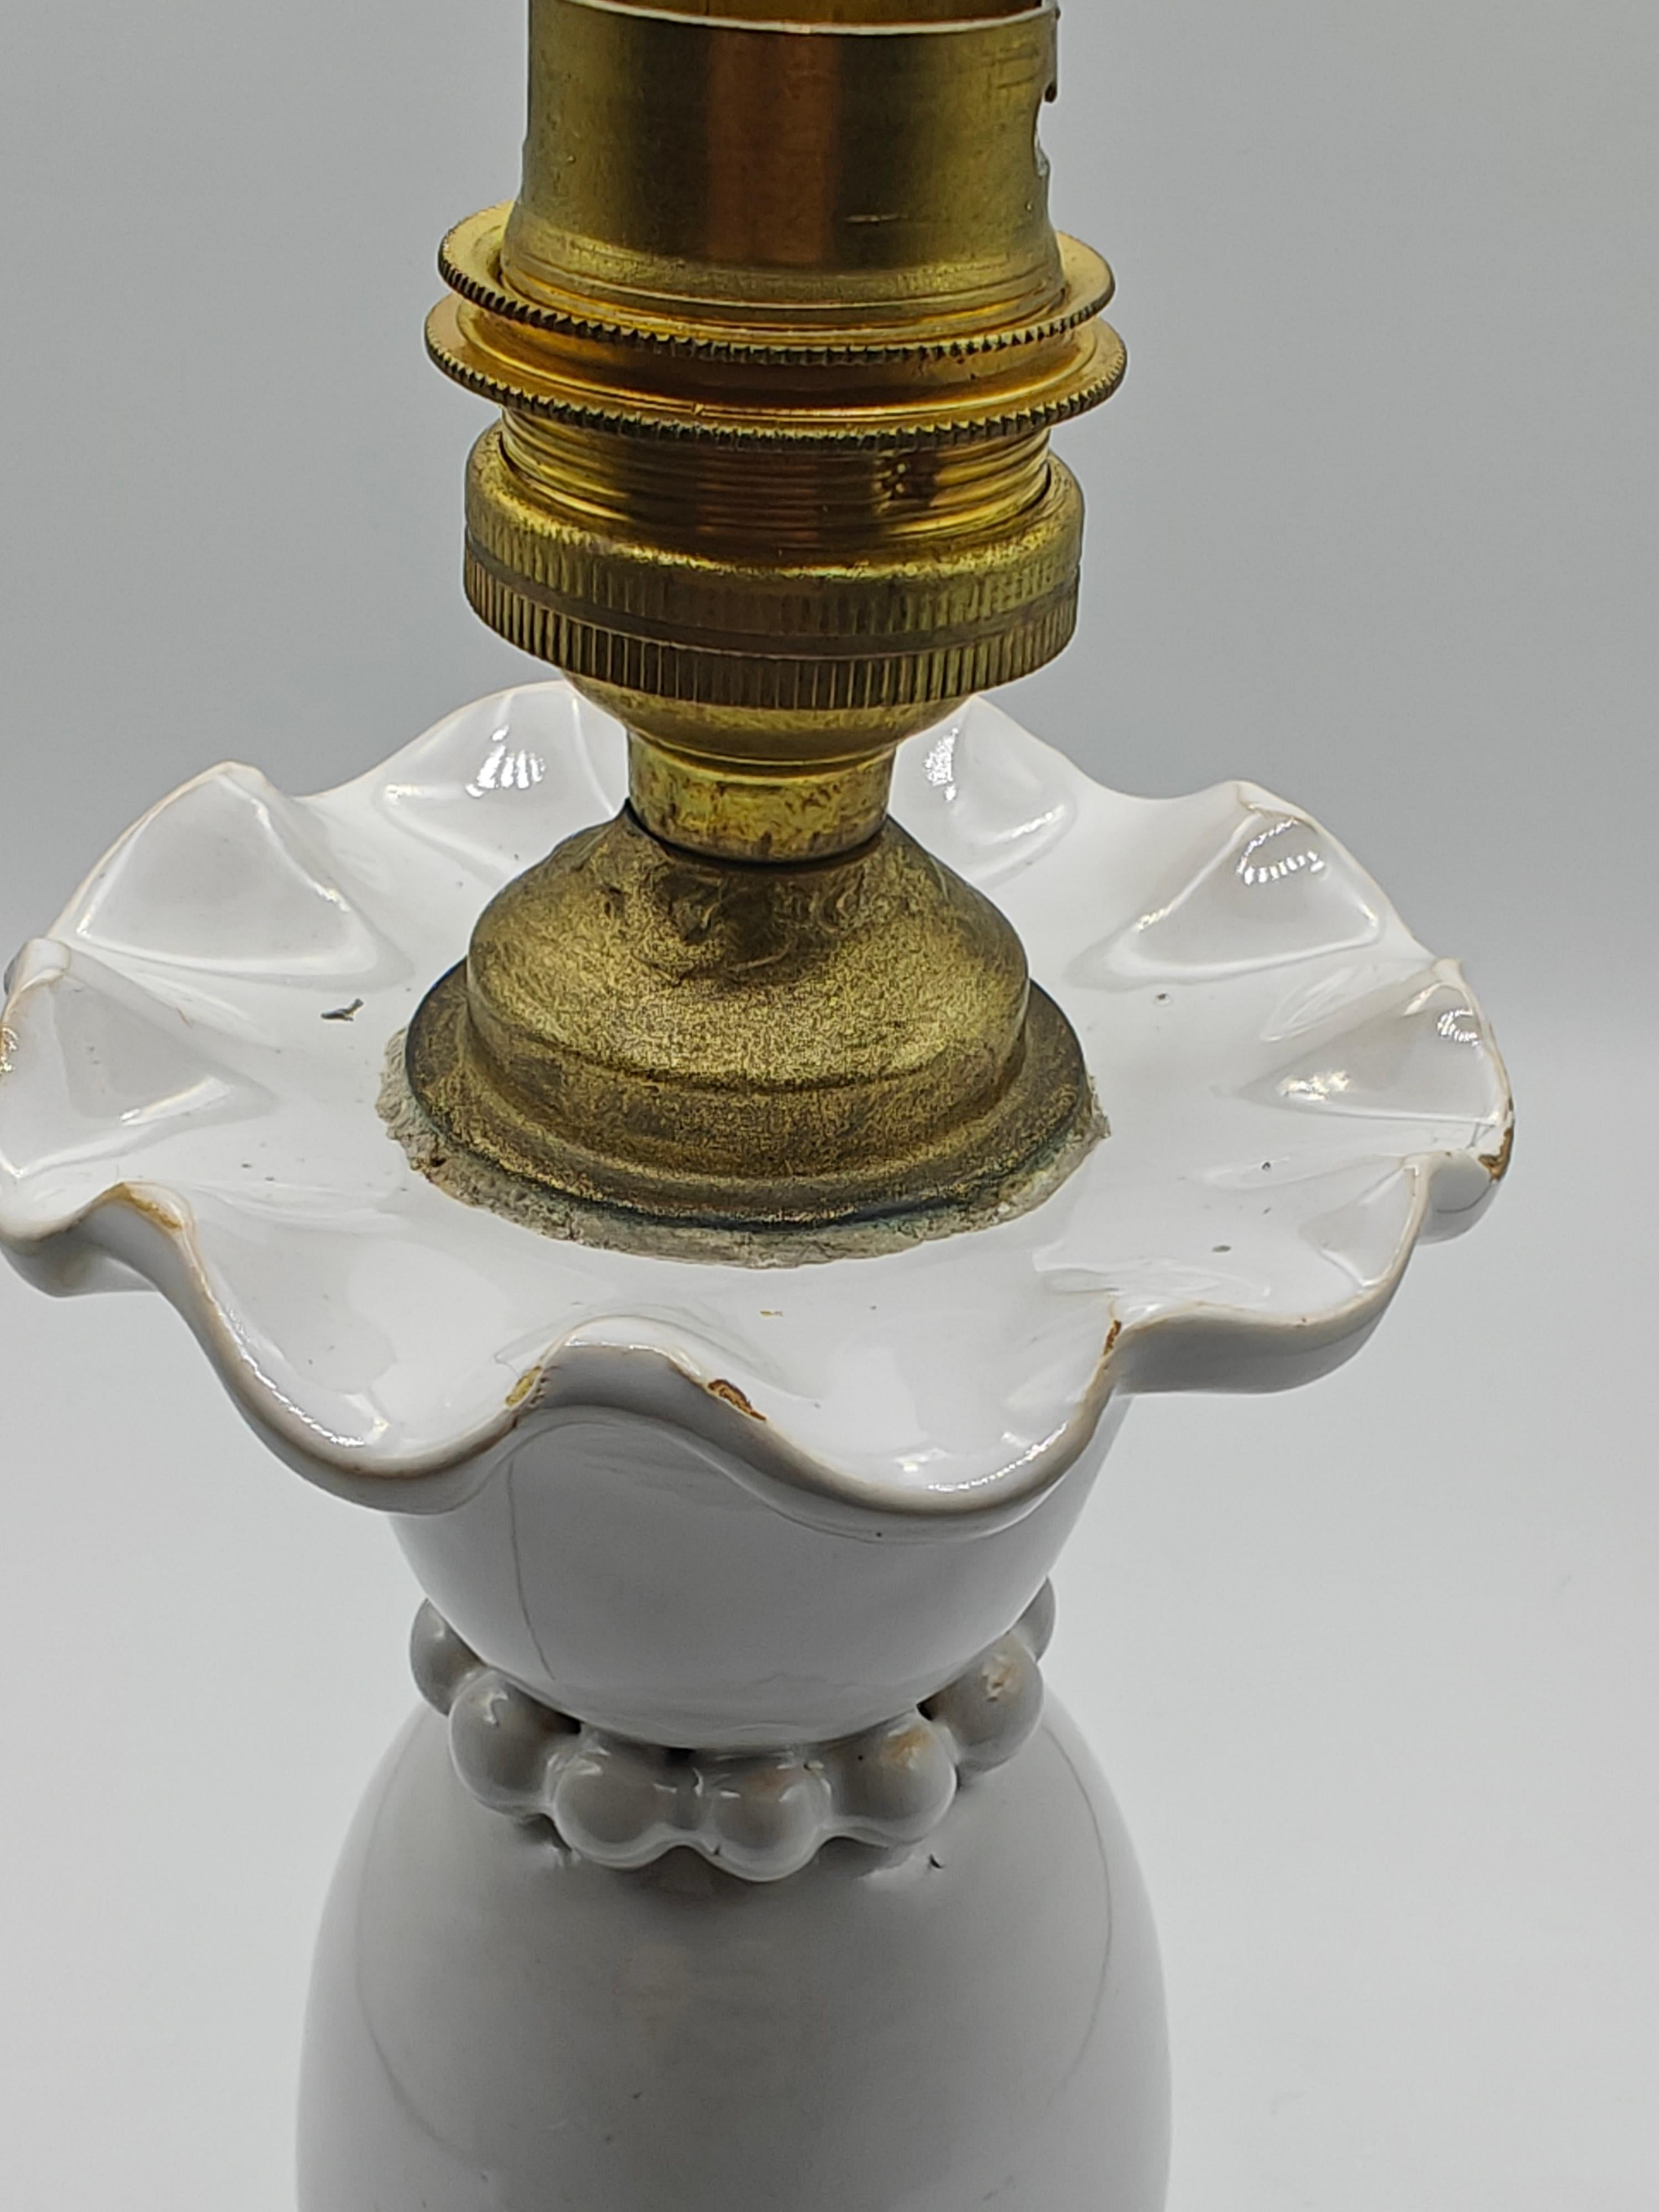 Beautiful French ceramist Émile Tessier's lamp base from the 1940s. A touch of French classicism with that milky white hue, reminiscent of Jean Roger's work, another French ceramist.

This lamp is perfect for an elegant office in a stylish interior.